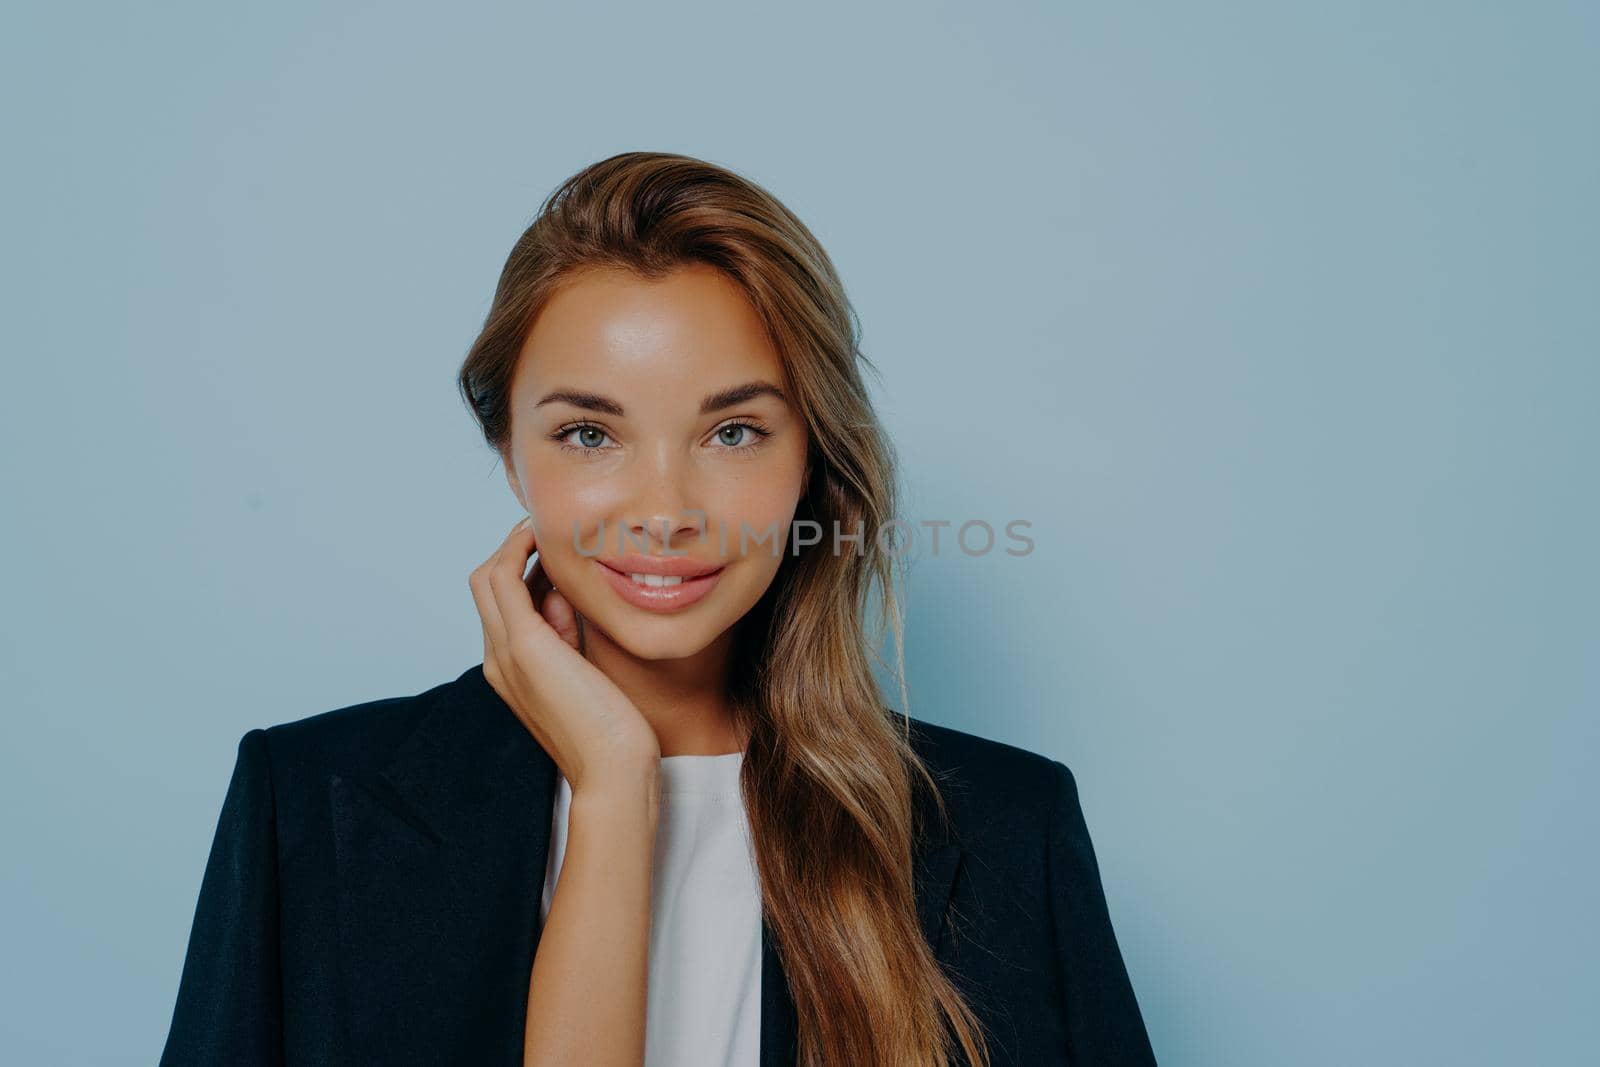 Attractive young business woman looking at camera with gentle smile and healthy clean skin gazing directly at camera, feelin satisfied with work done while posing against light blue background